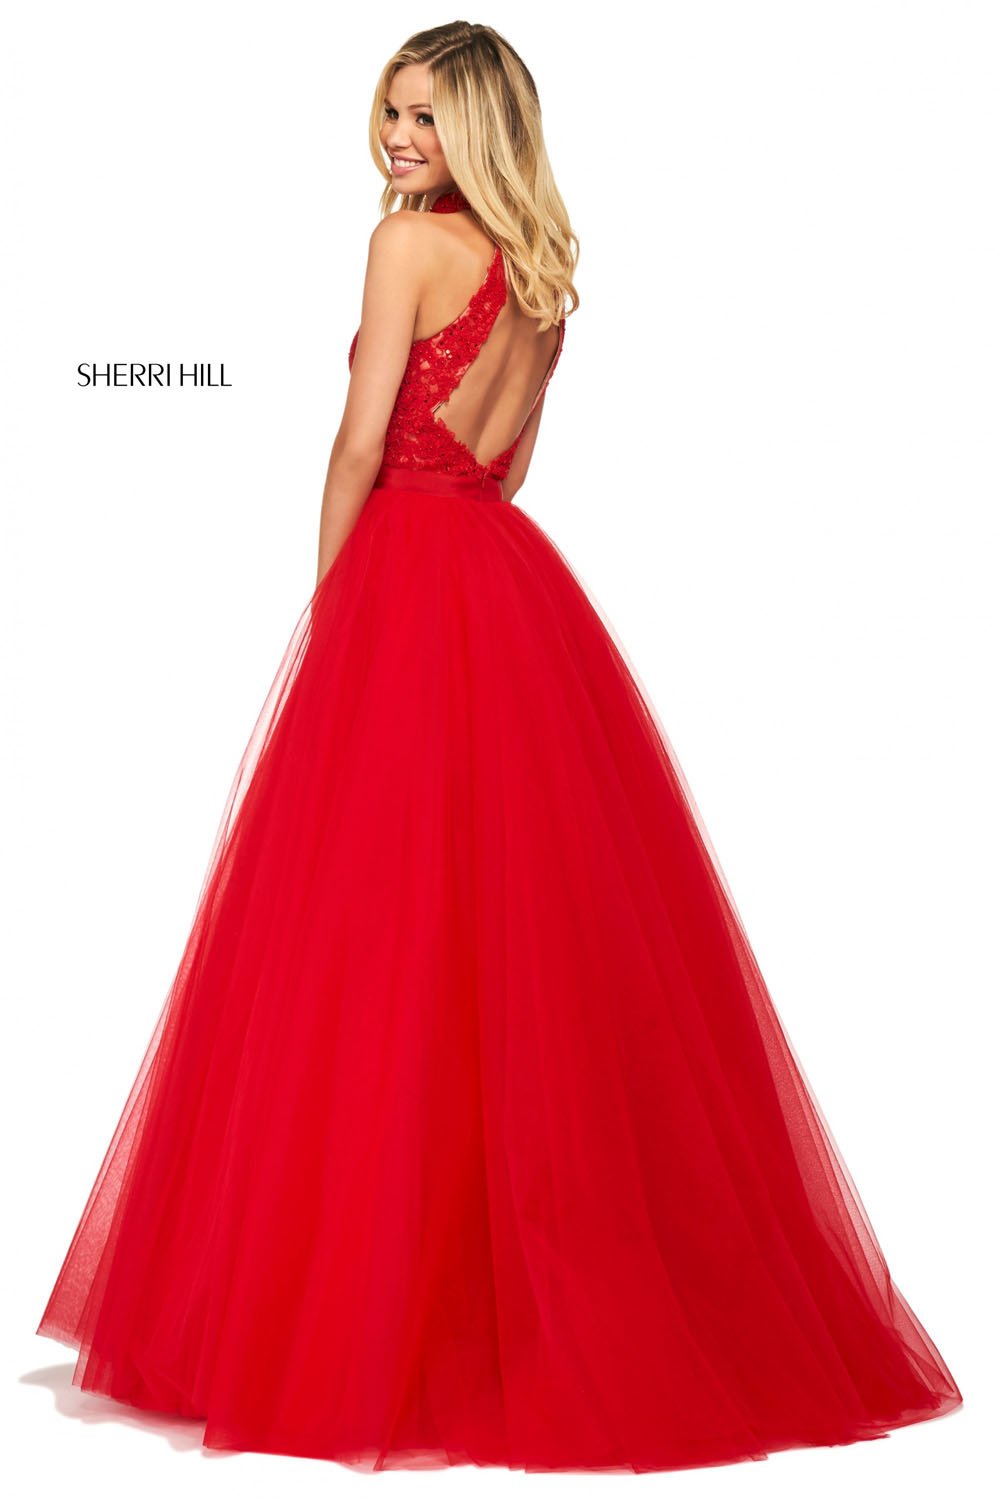 Sherri Hill 53727 dress images in these colors: Light Blue, Blush, Red, Ivory, Yellow, Black.